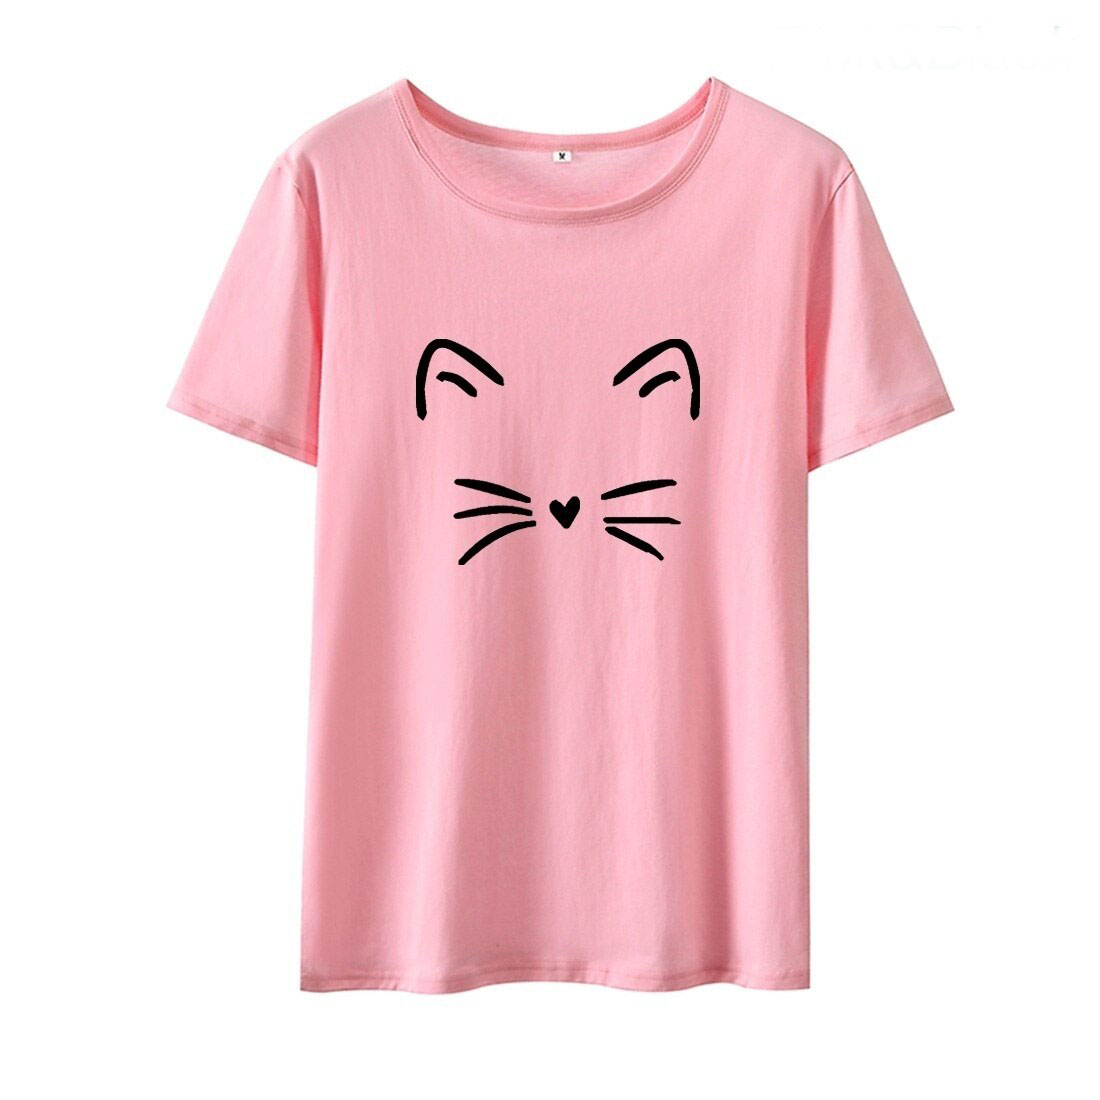 Kitty Whiskers T-Shirt in Multiple Colors: S-2XL | Bratty Catty